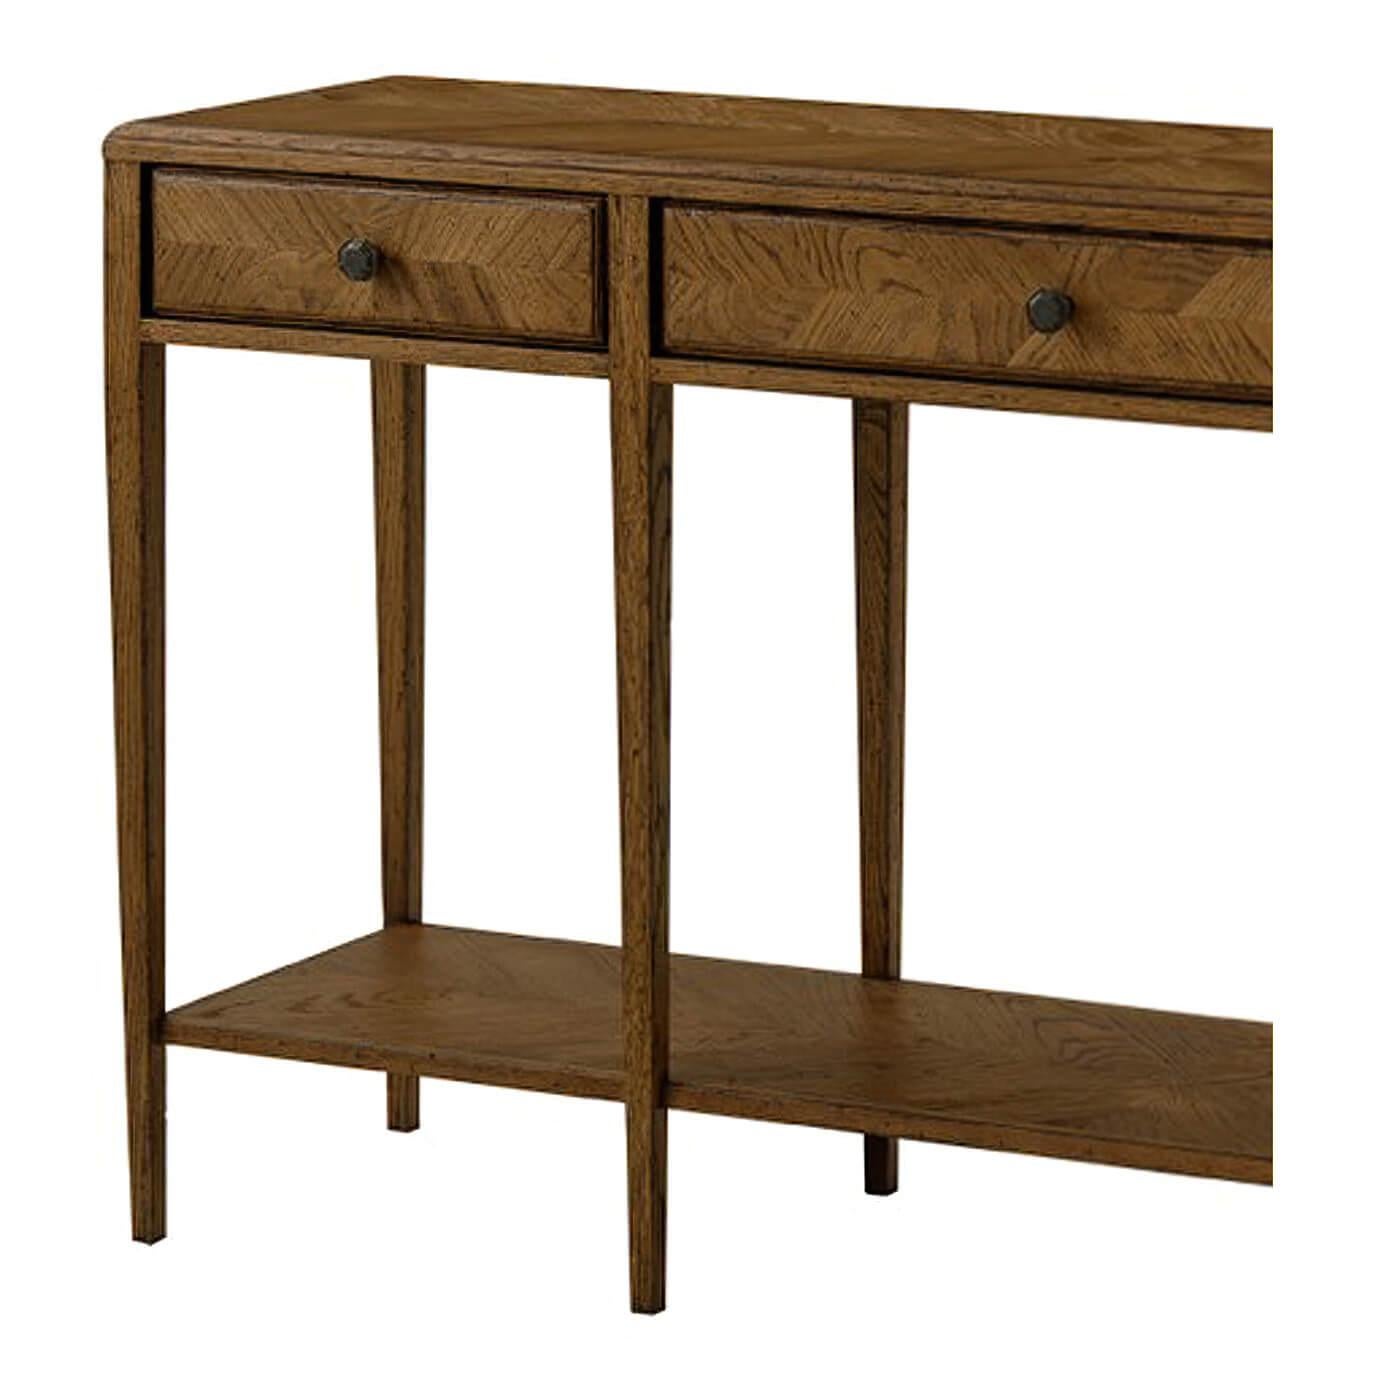 A dark oak parquetry two-tier console table with mirrored herringbone oak parquetry on its top and drawer faces. This two-tiered table includes three frieze drawers accented with Verde Bronze finished handles and has solid tapered legs. It is shown